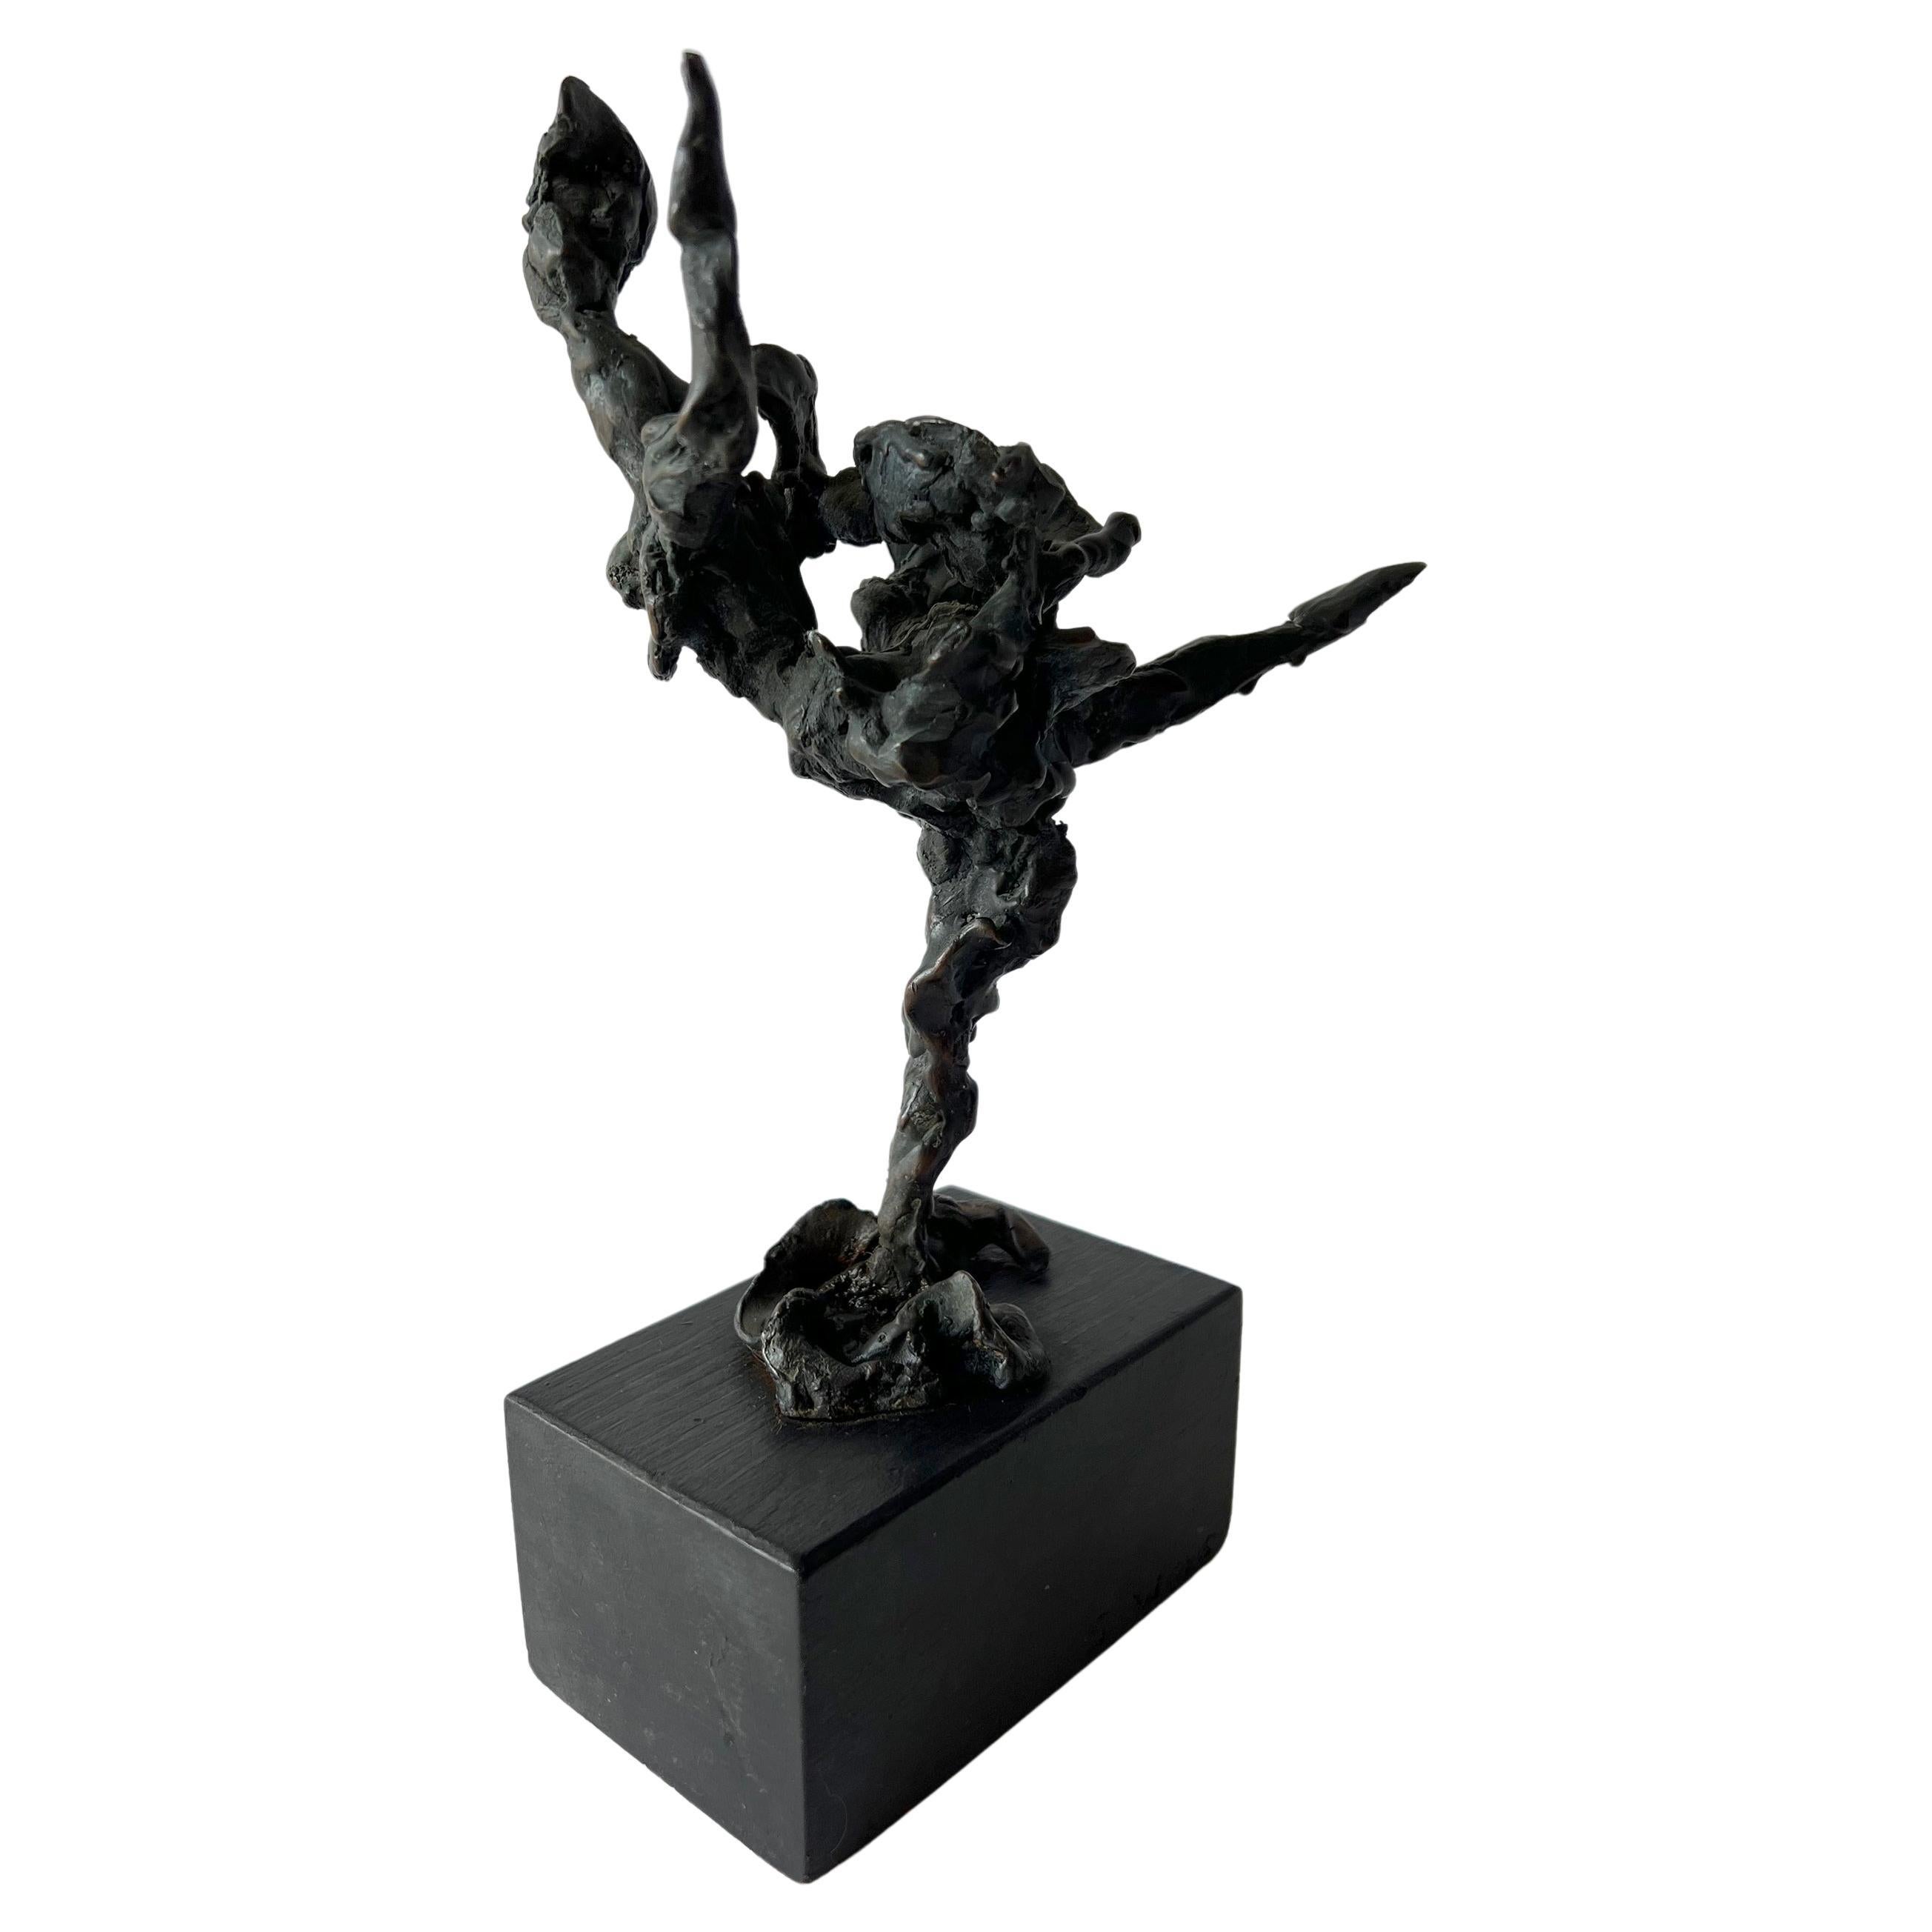 Hand sculpted bronze dancer sculpture created by listed artist Sylvia Weiss of Chicago, Illinois. Sculpture measures 9.5